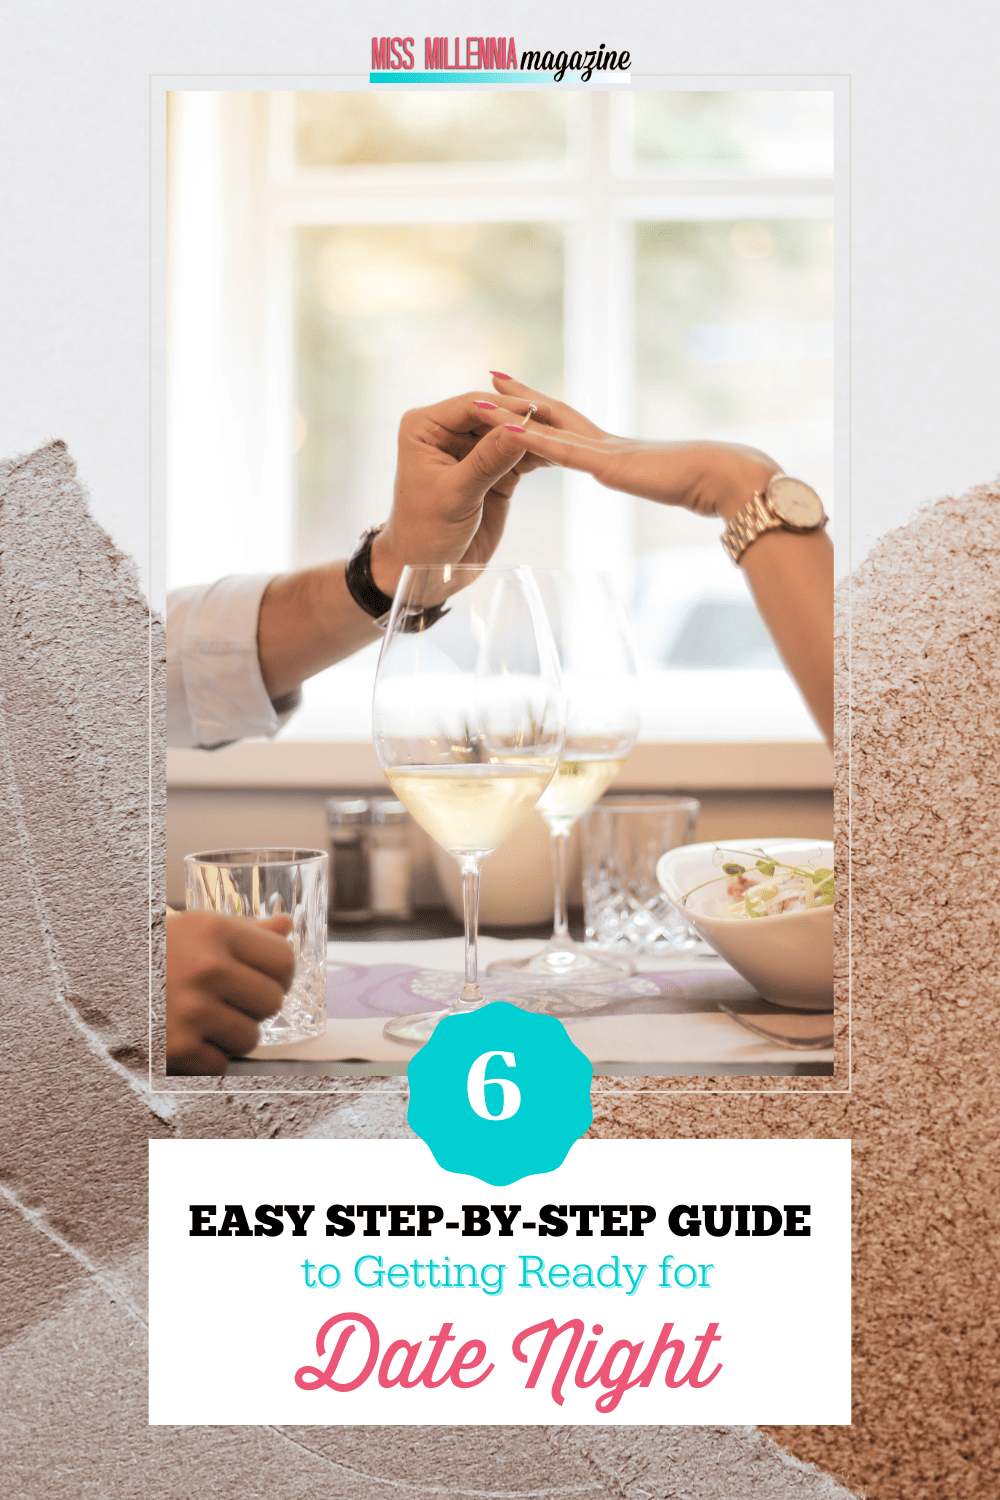 Prepping for Passion: 6 Easy Step-by-Step Guide to Getting Ready for Date Night